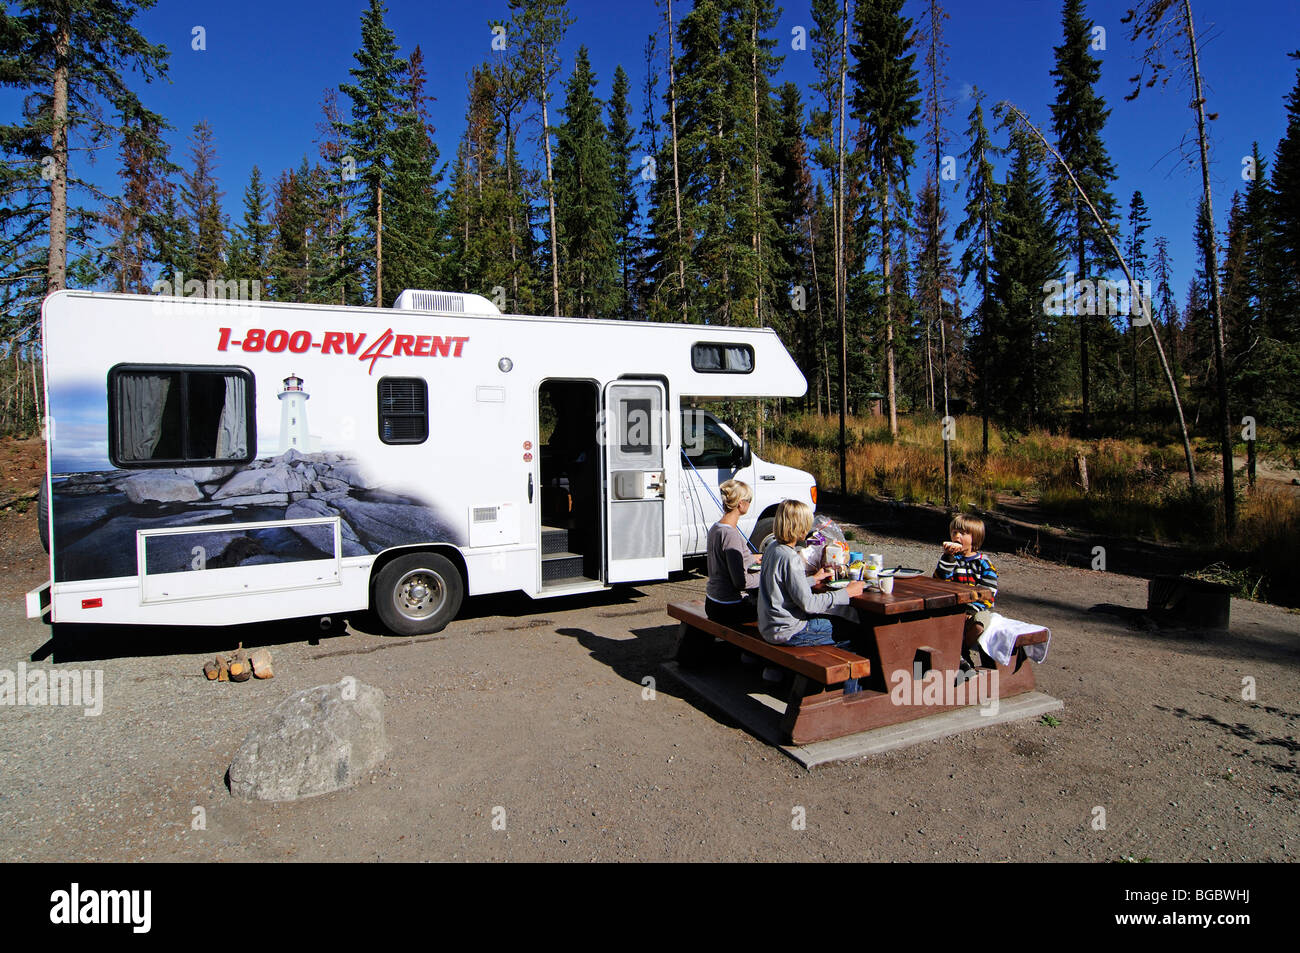 Woman and children with camper, British Columbia, Canada Stock Photo